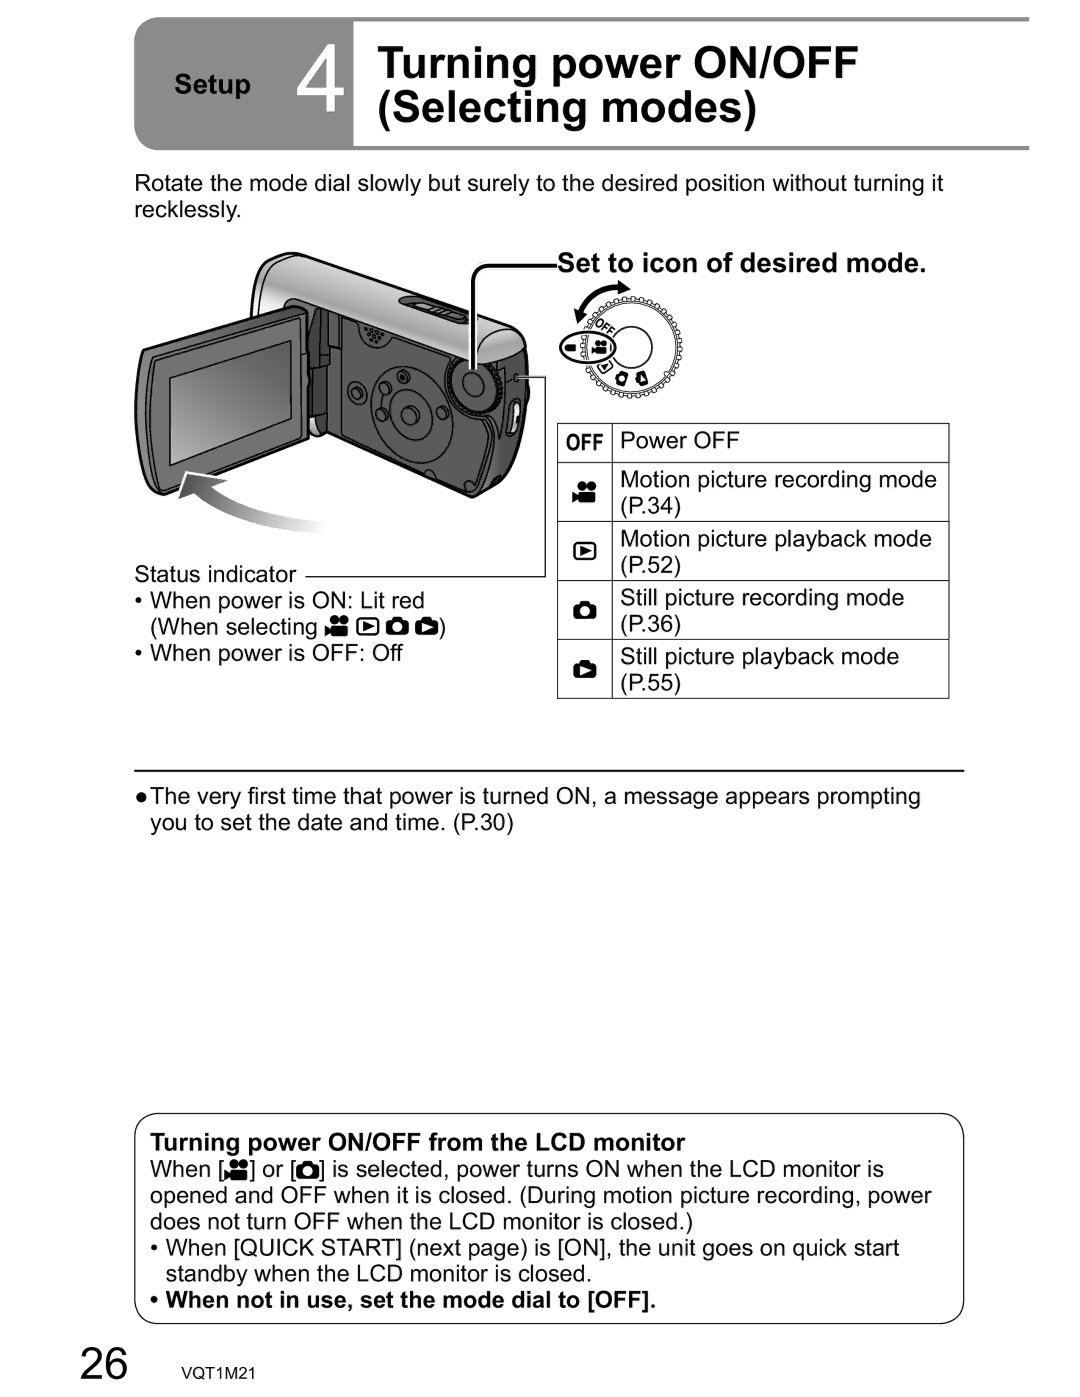 Panasonic SDR-SW20PC operating instructions Turning power ON/OFF, Selecting modes, Set to icon of desired mode 